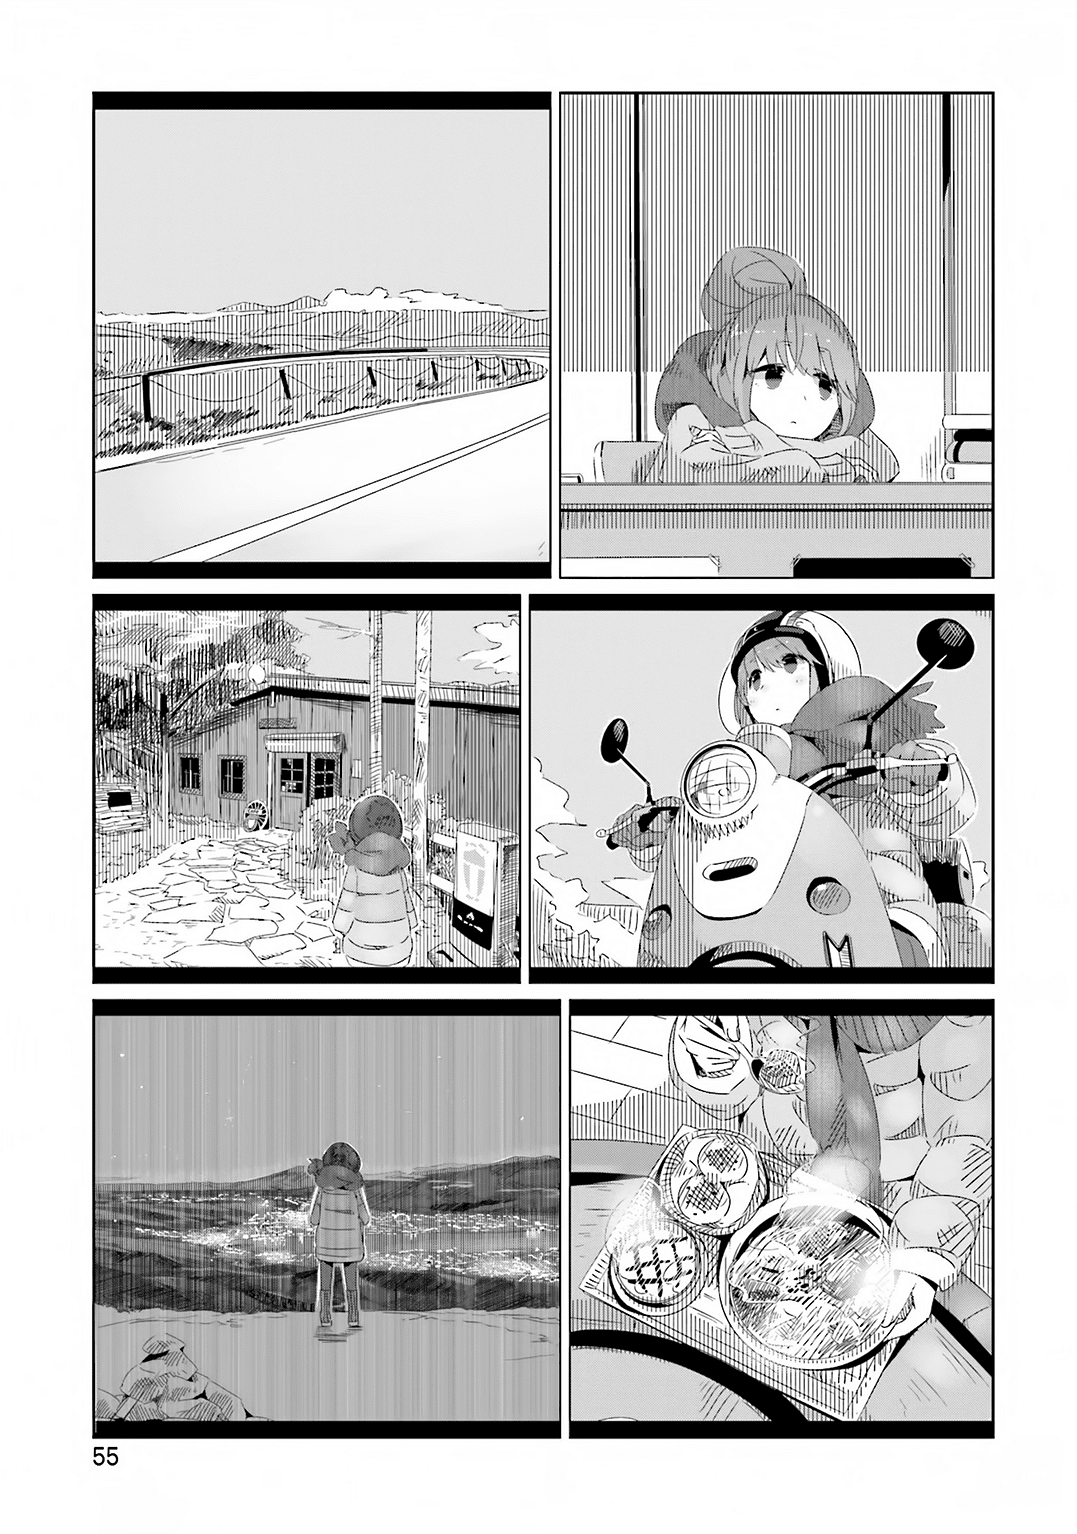 Yurucamp Chapter 9 V2 : After-School Souvenirs And Yakiniku Basics - Picture 3